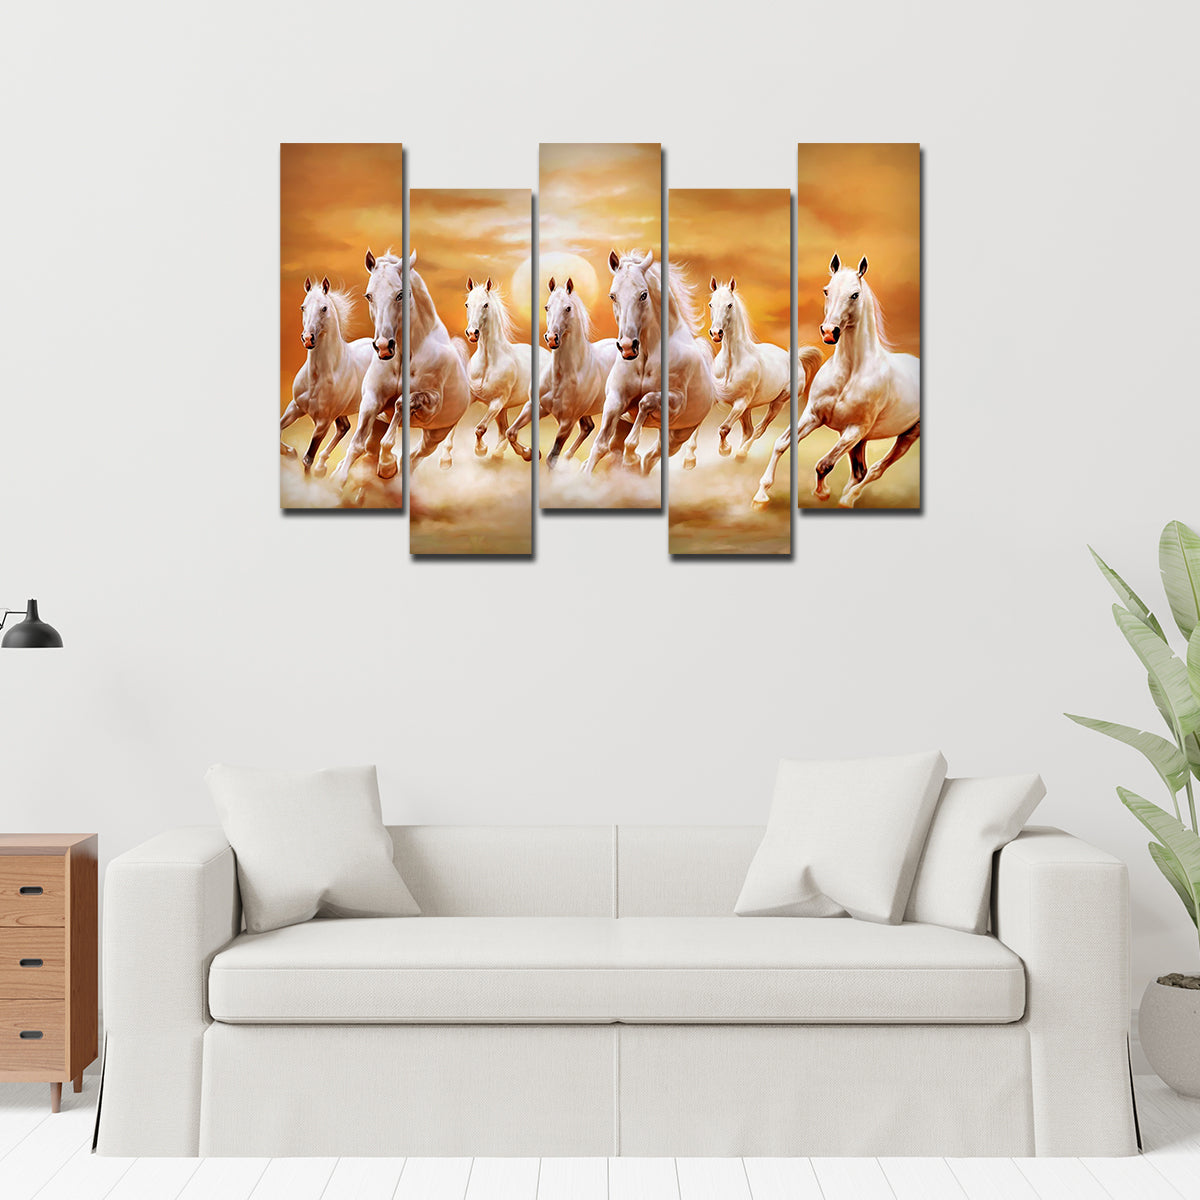 Seven Running Horses Wall Painting Canvas Painting Premium 5 Pieces